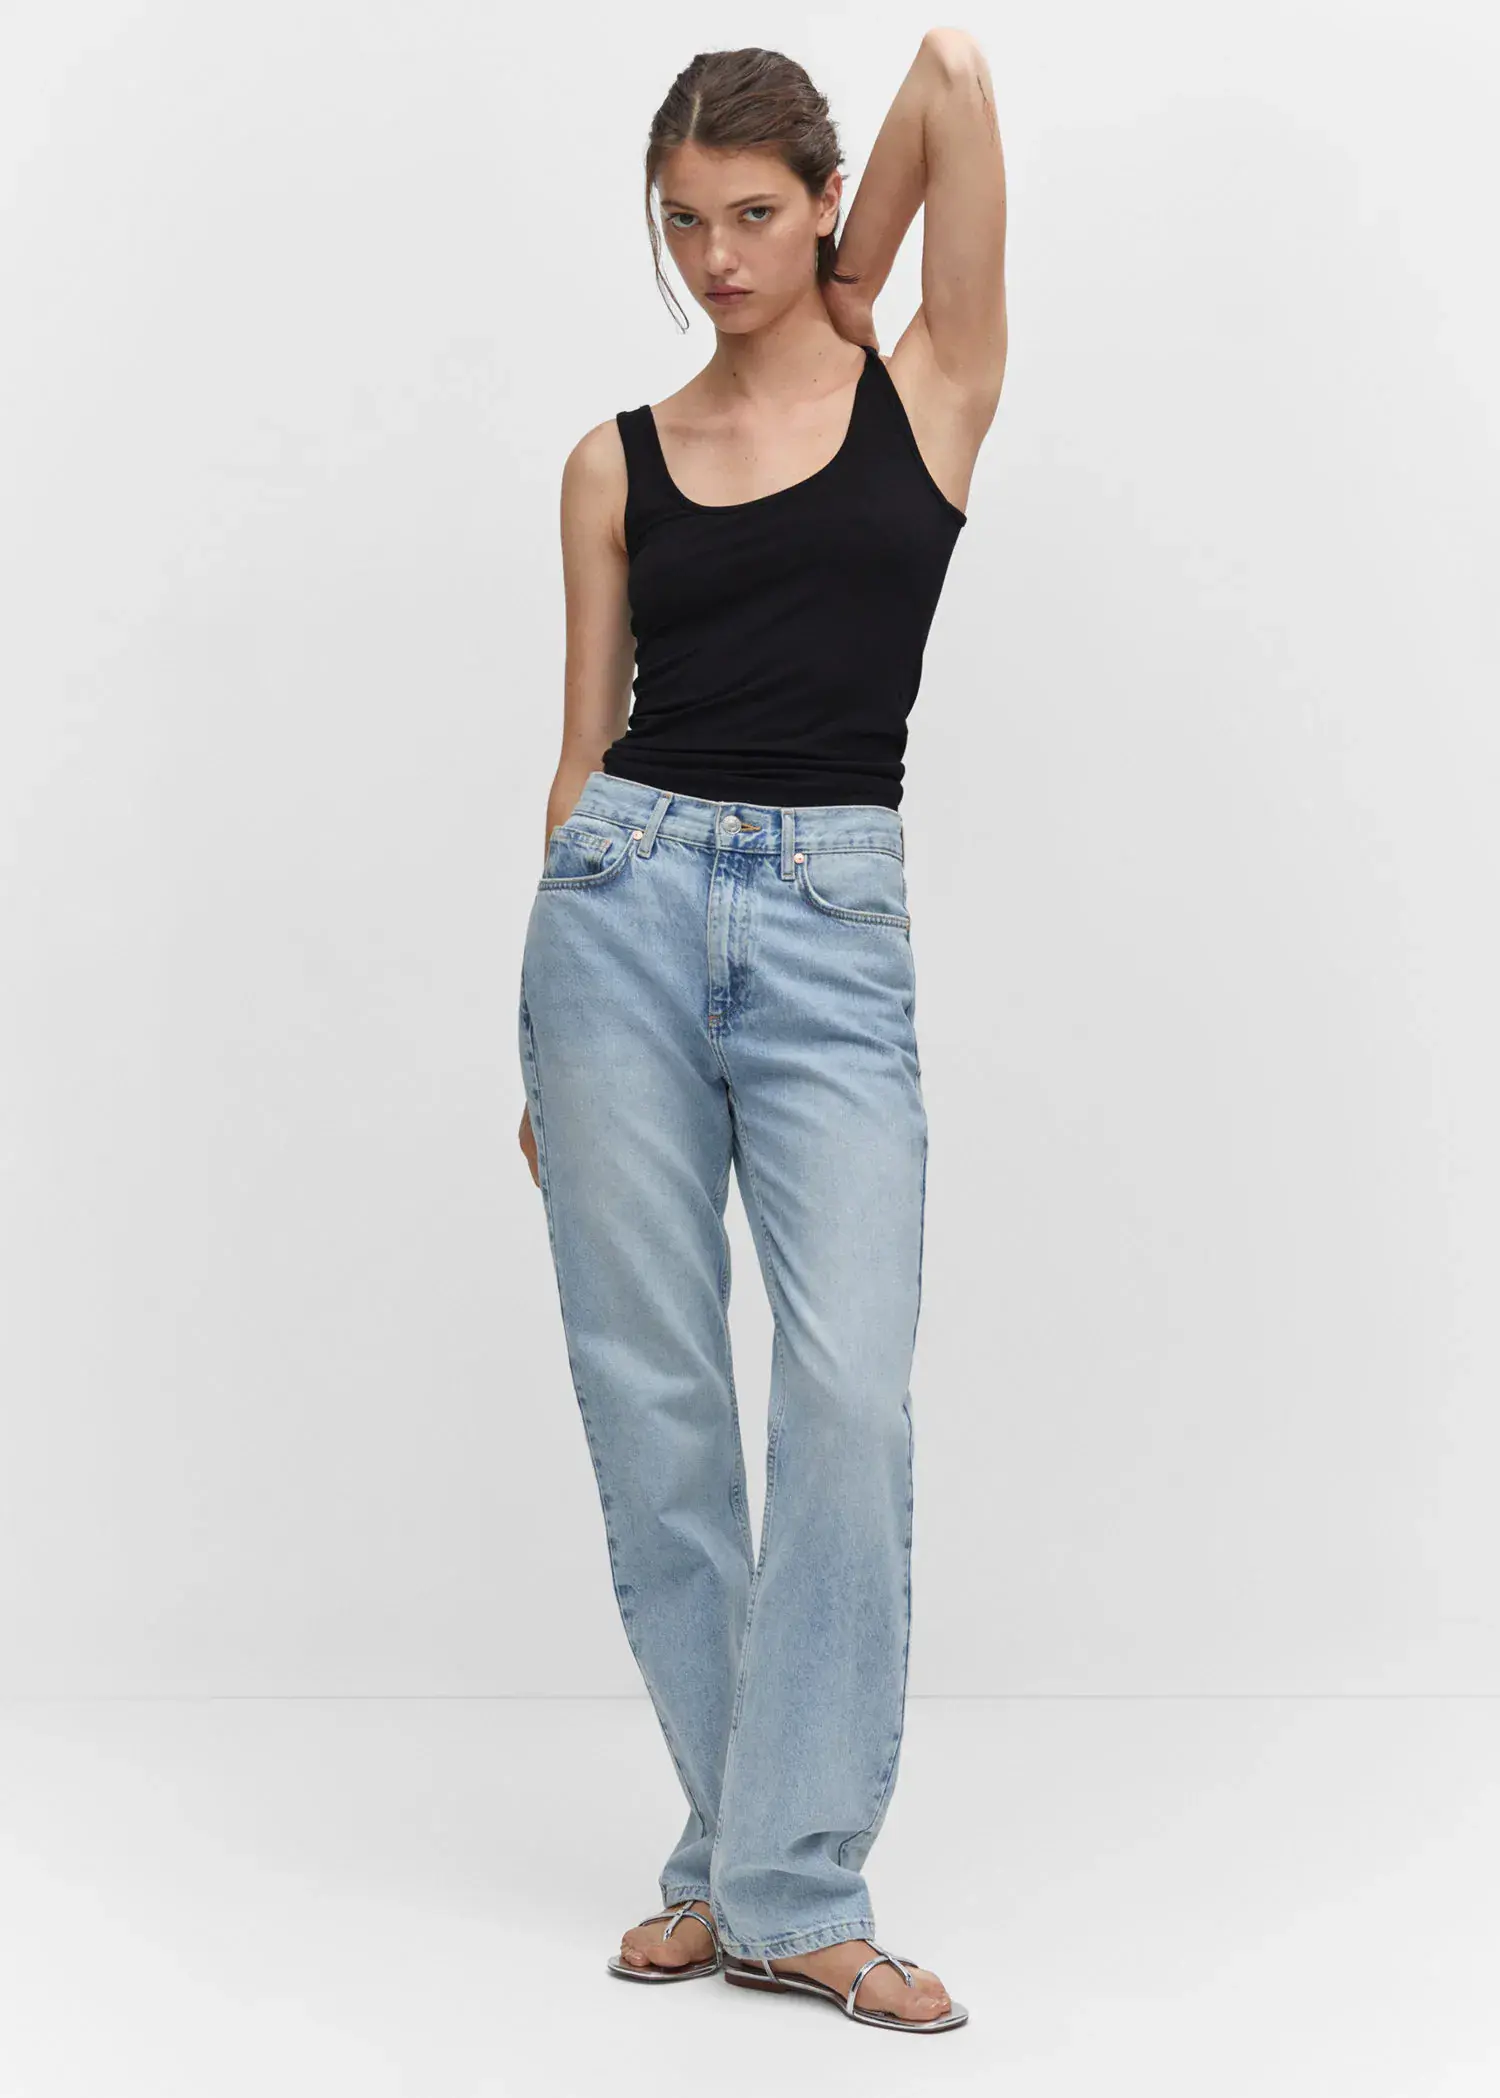 Mango Strapless halter neck top. a woman in black tank top and light blue jeans. 